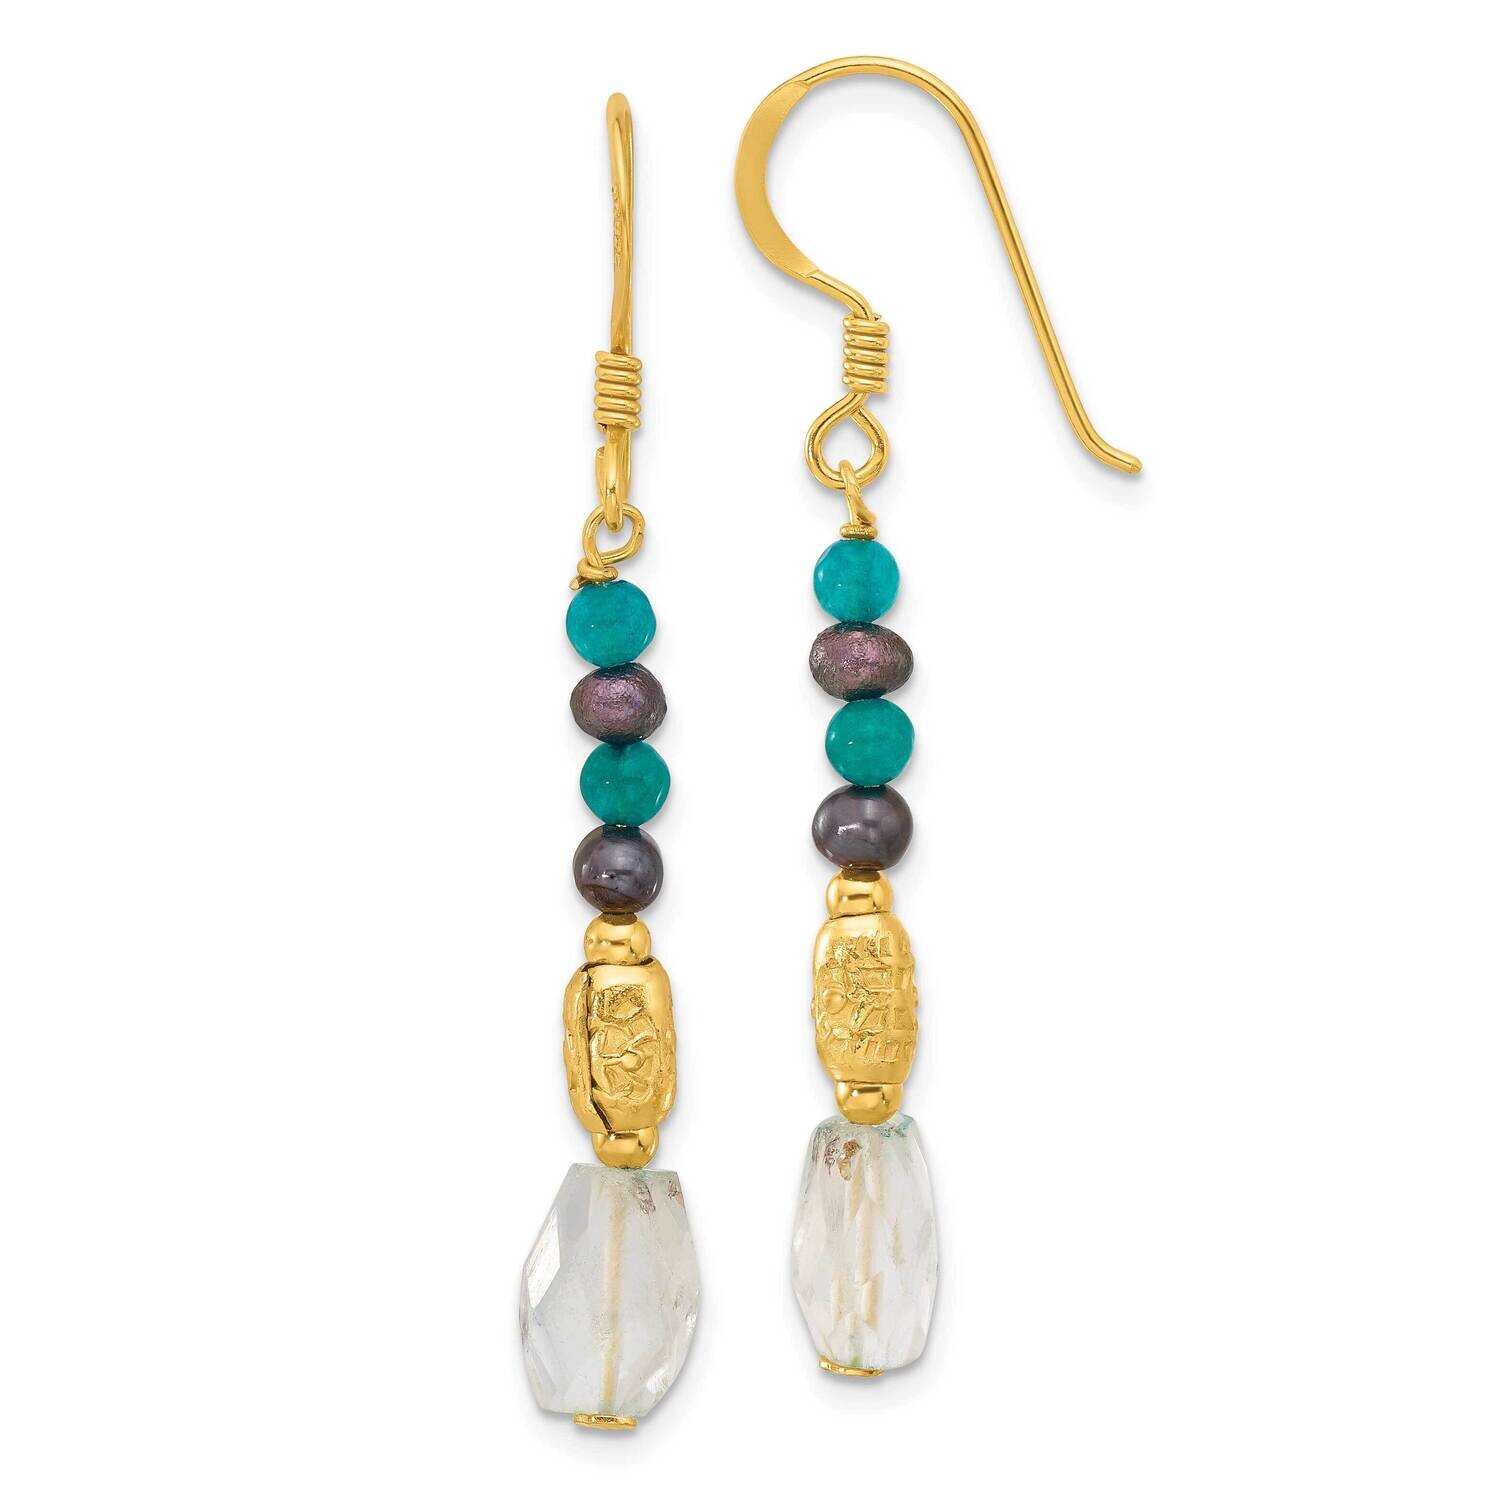 Gold-Plated Polished & Textured Black Freshwater Cultured Pearl & Blue Quartz Beaded Dangle Earrings Sterling Silver QE17369